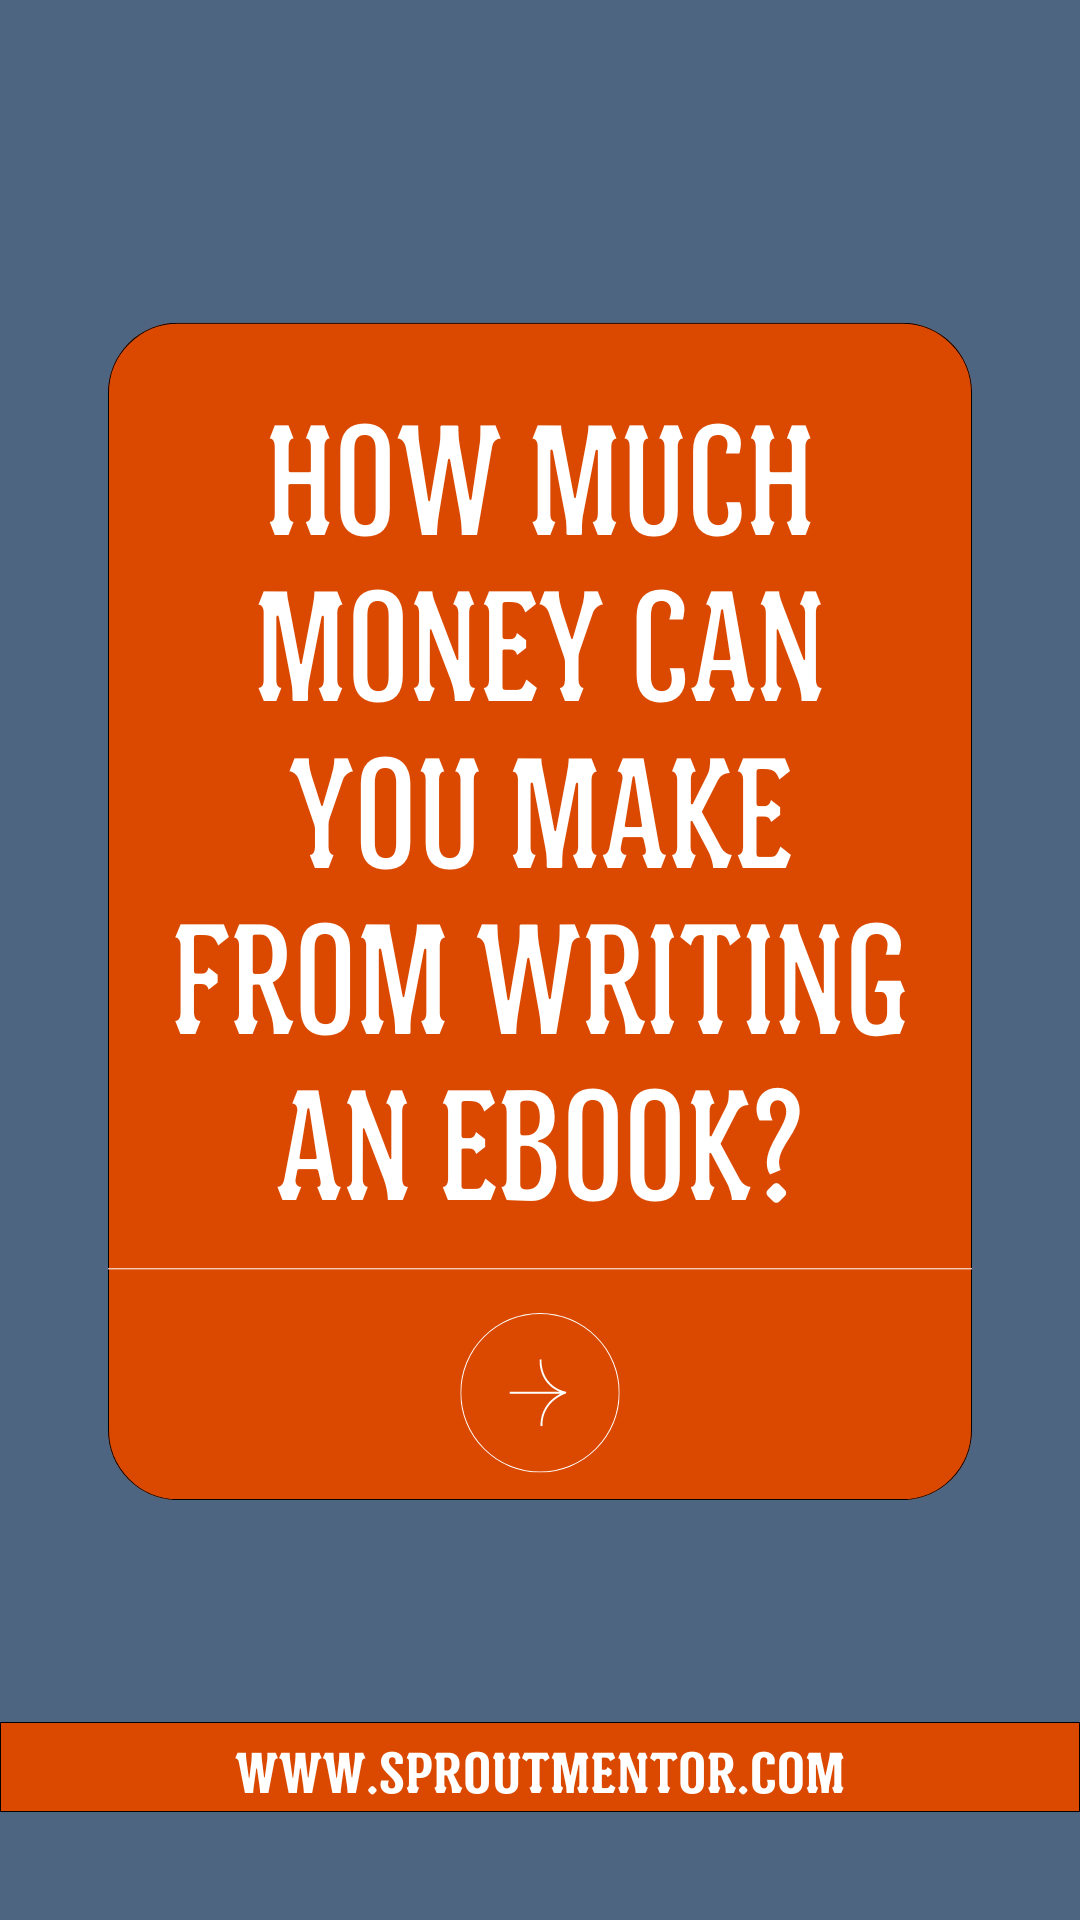 How Much Money Can You Make from Writing an Ebook?